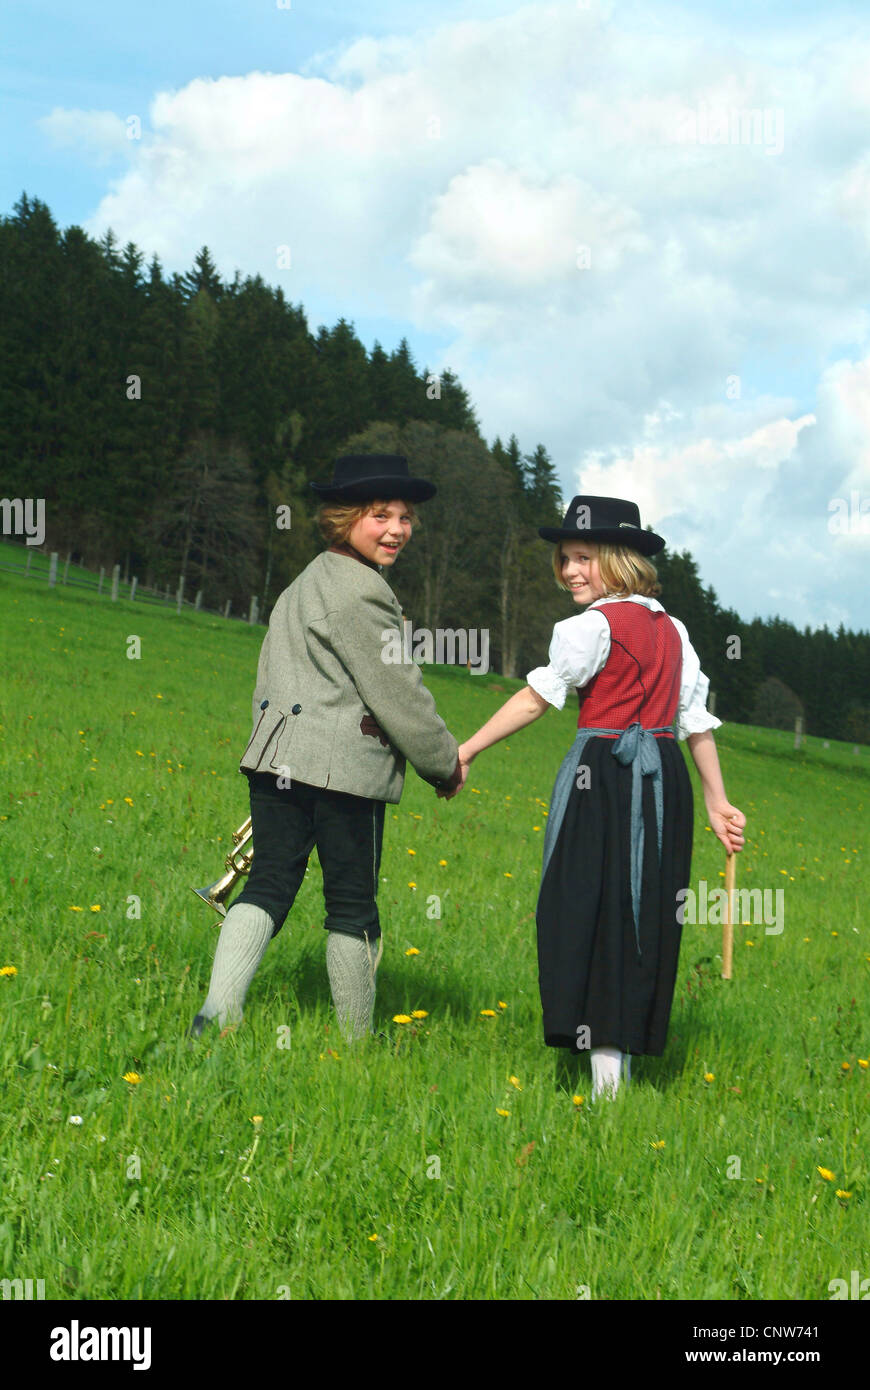 two children in traditional costumes walking through a meadow hand in hand Stock Photo